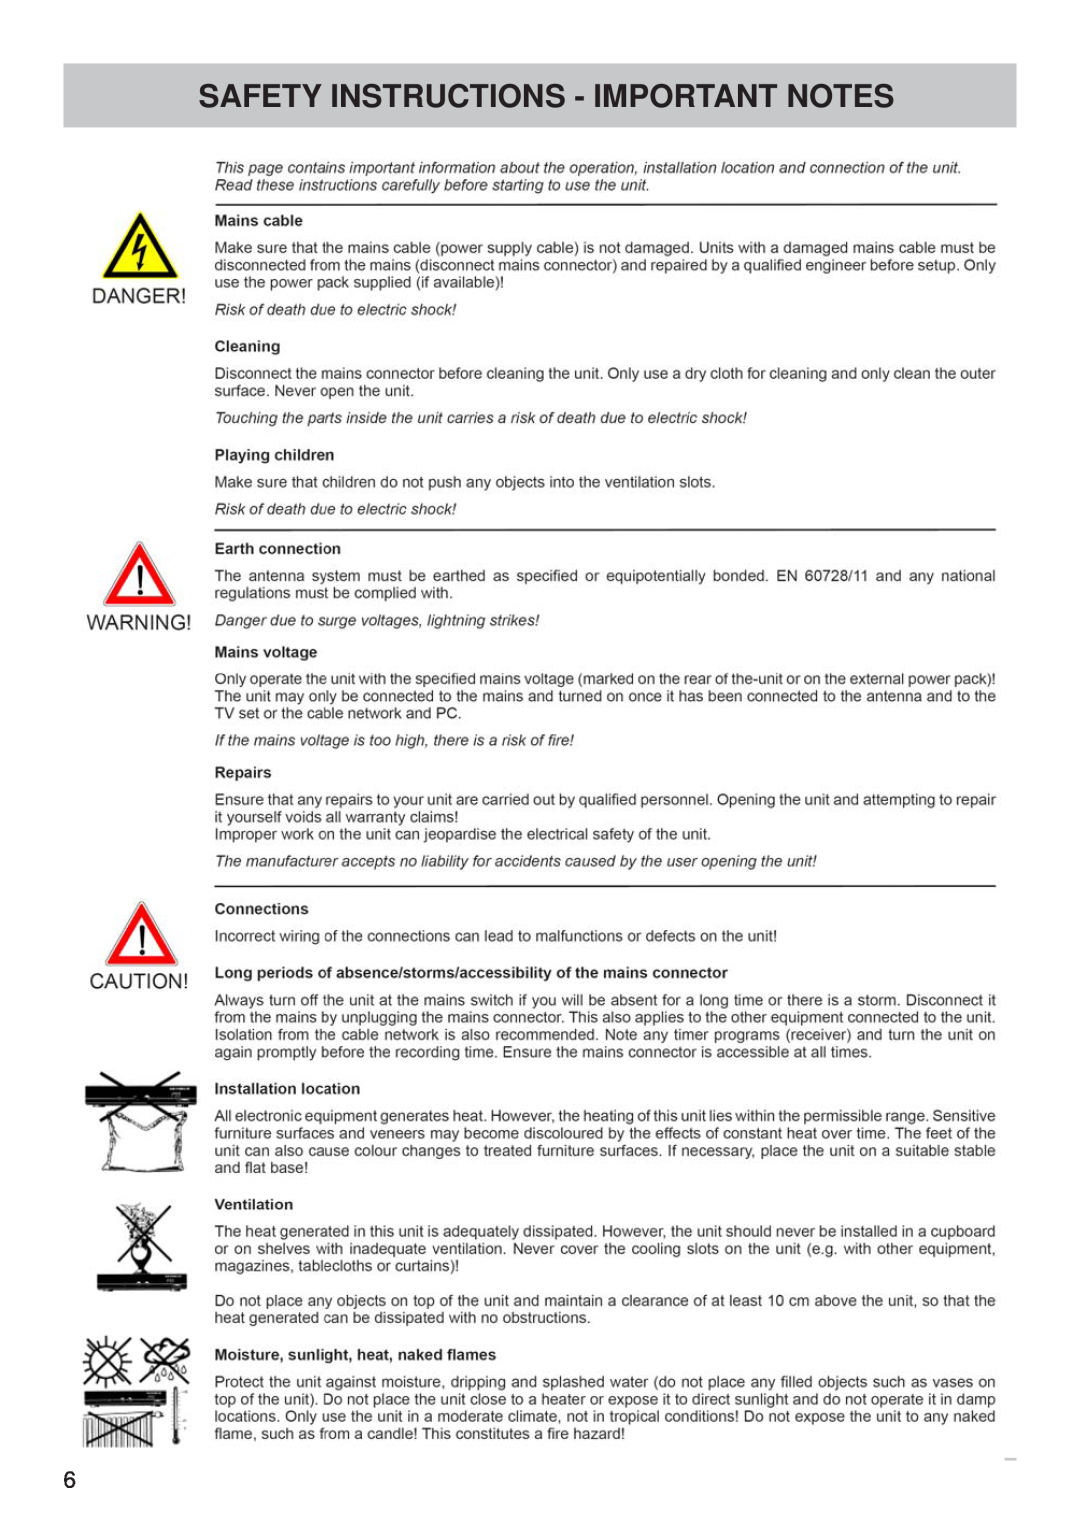 Kathrein UFS 710si, UFS 710sw manual Safety Instructions - Important Notes 